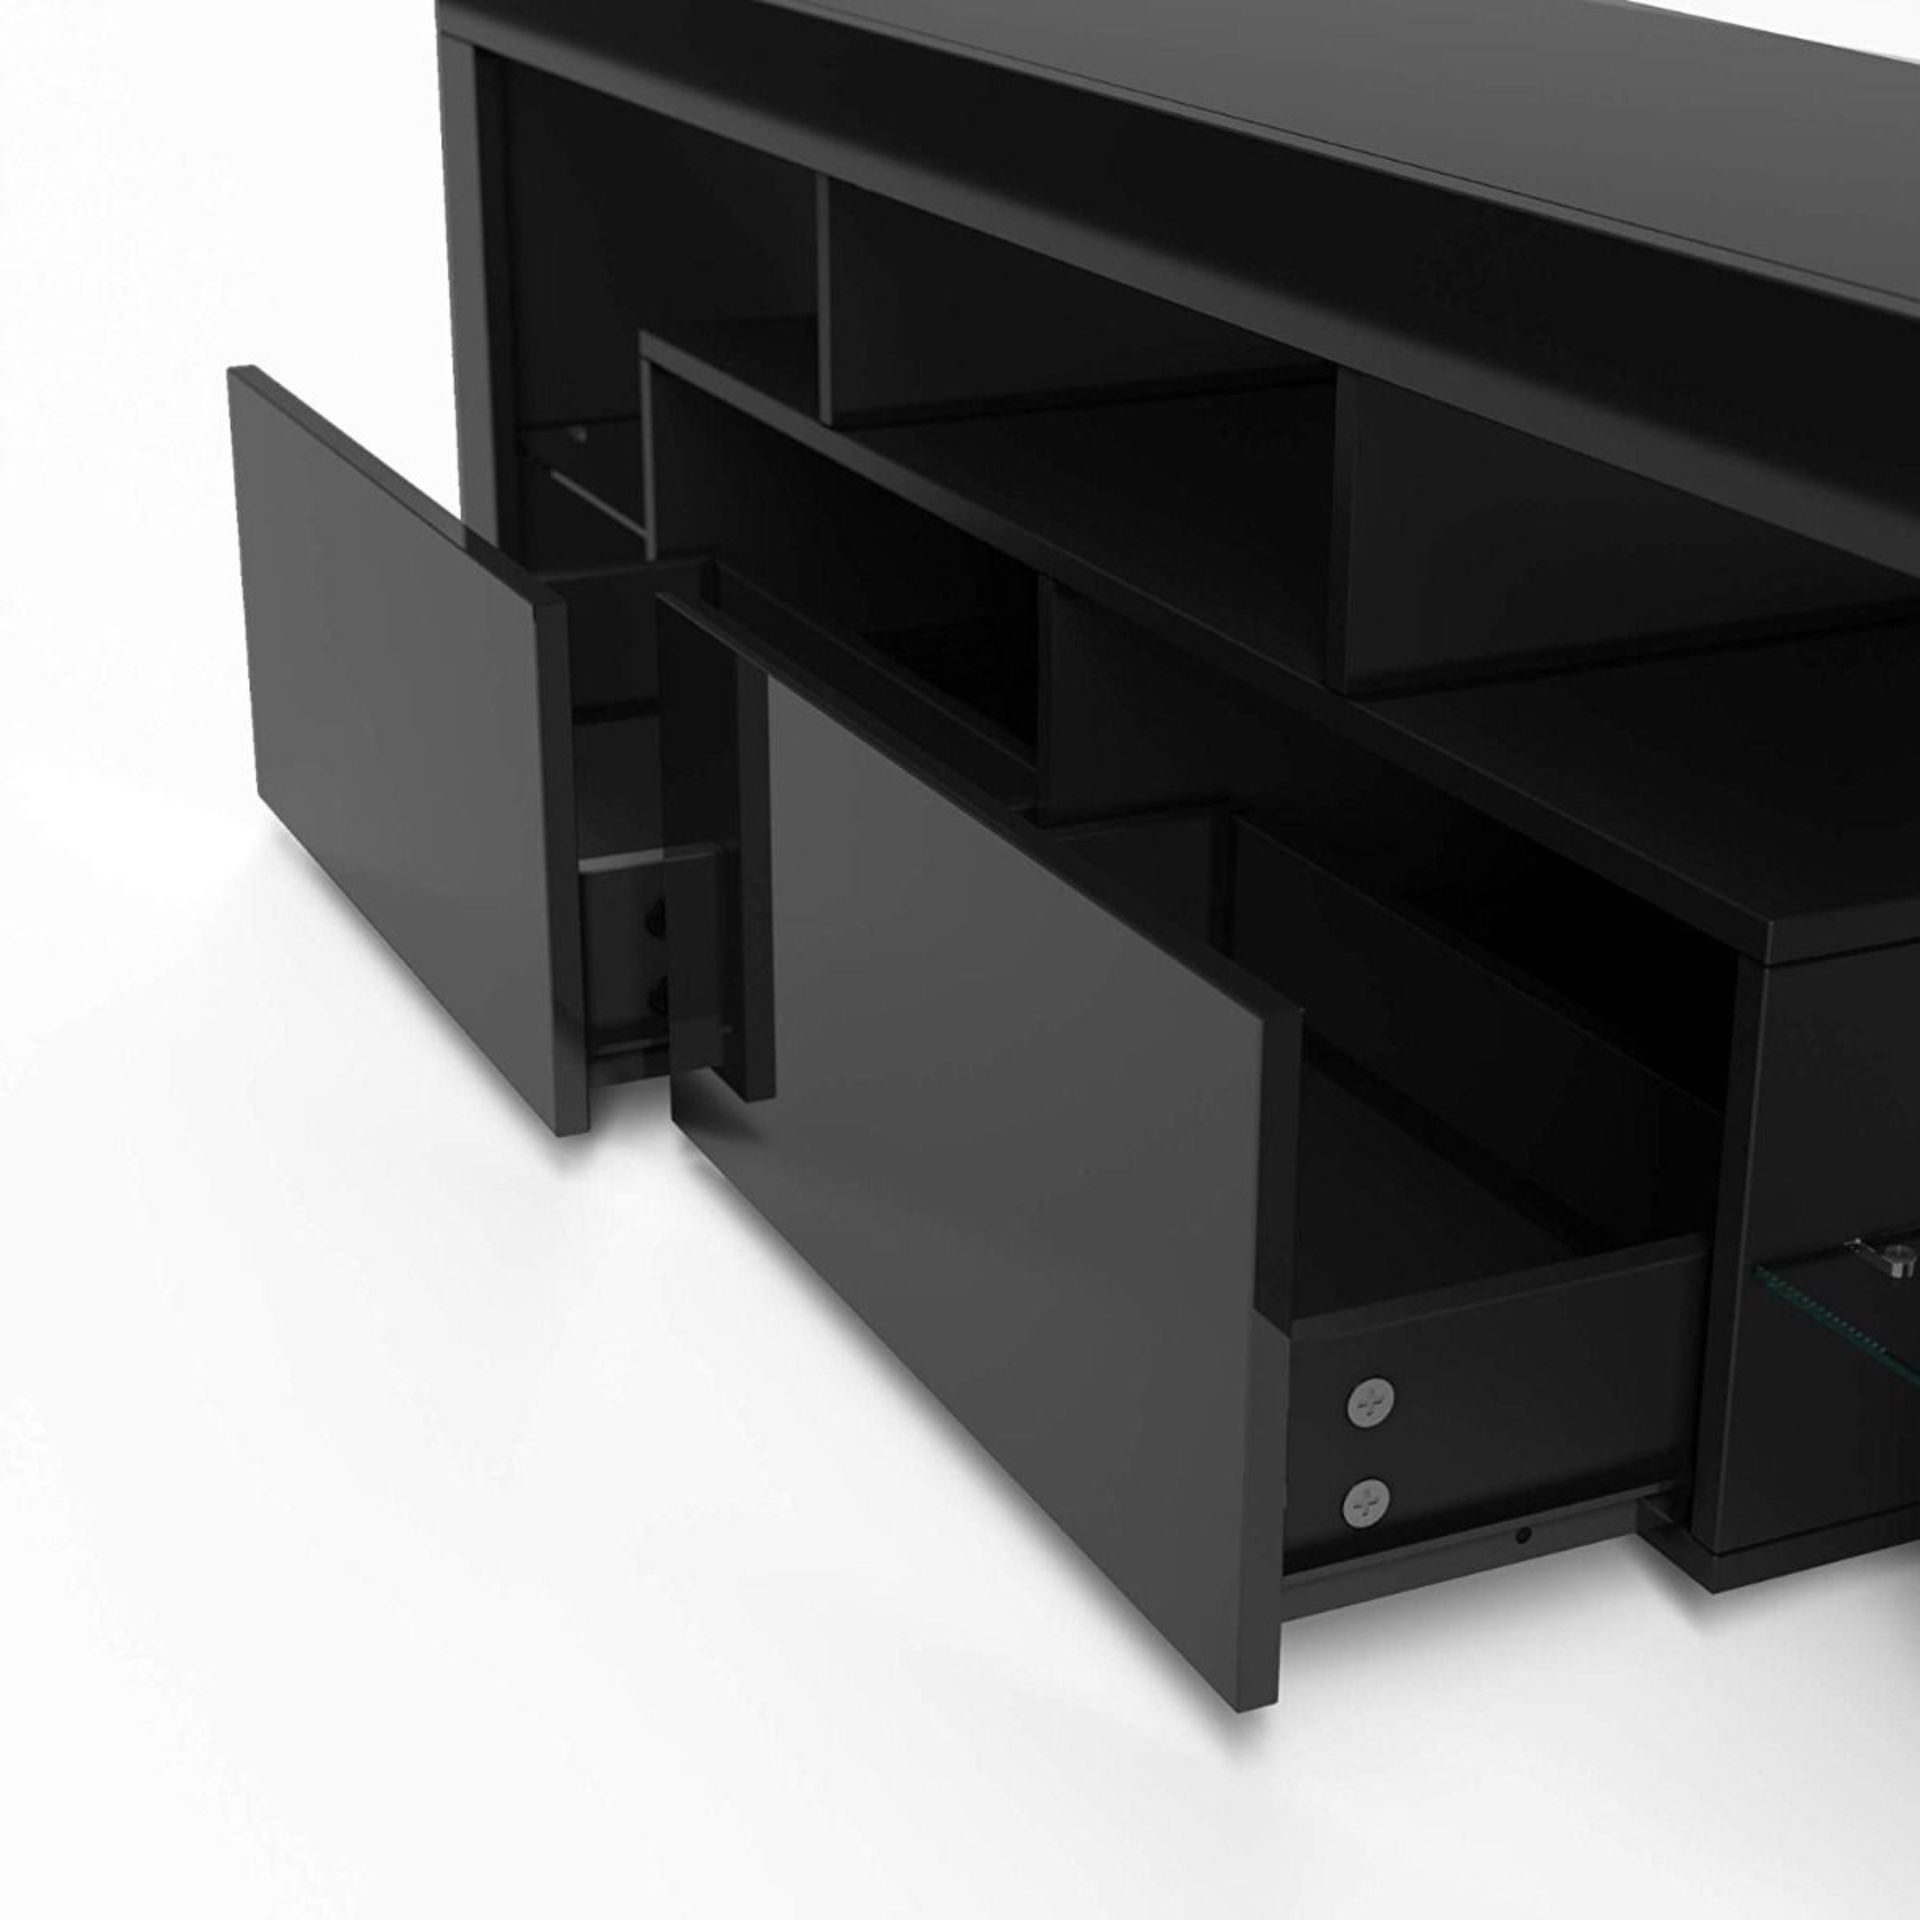 MODERN 160CM TV UNIT CABINET TV STAND HIGH GLOSS DOORS WITH FREE LEDS - Image 3 of 3